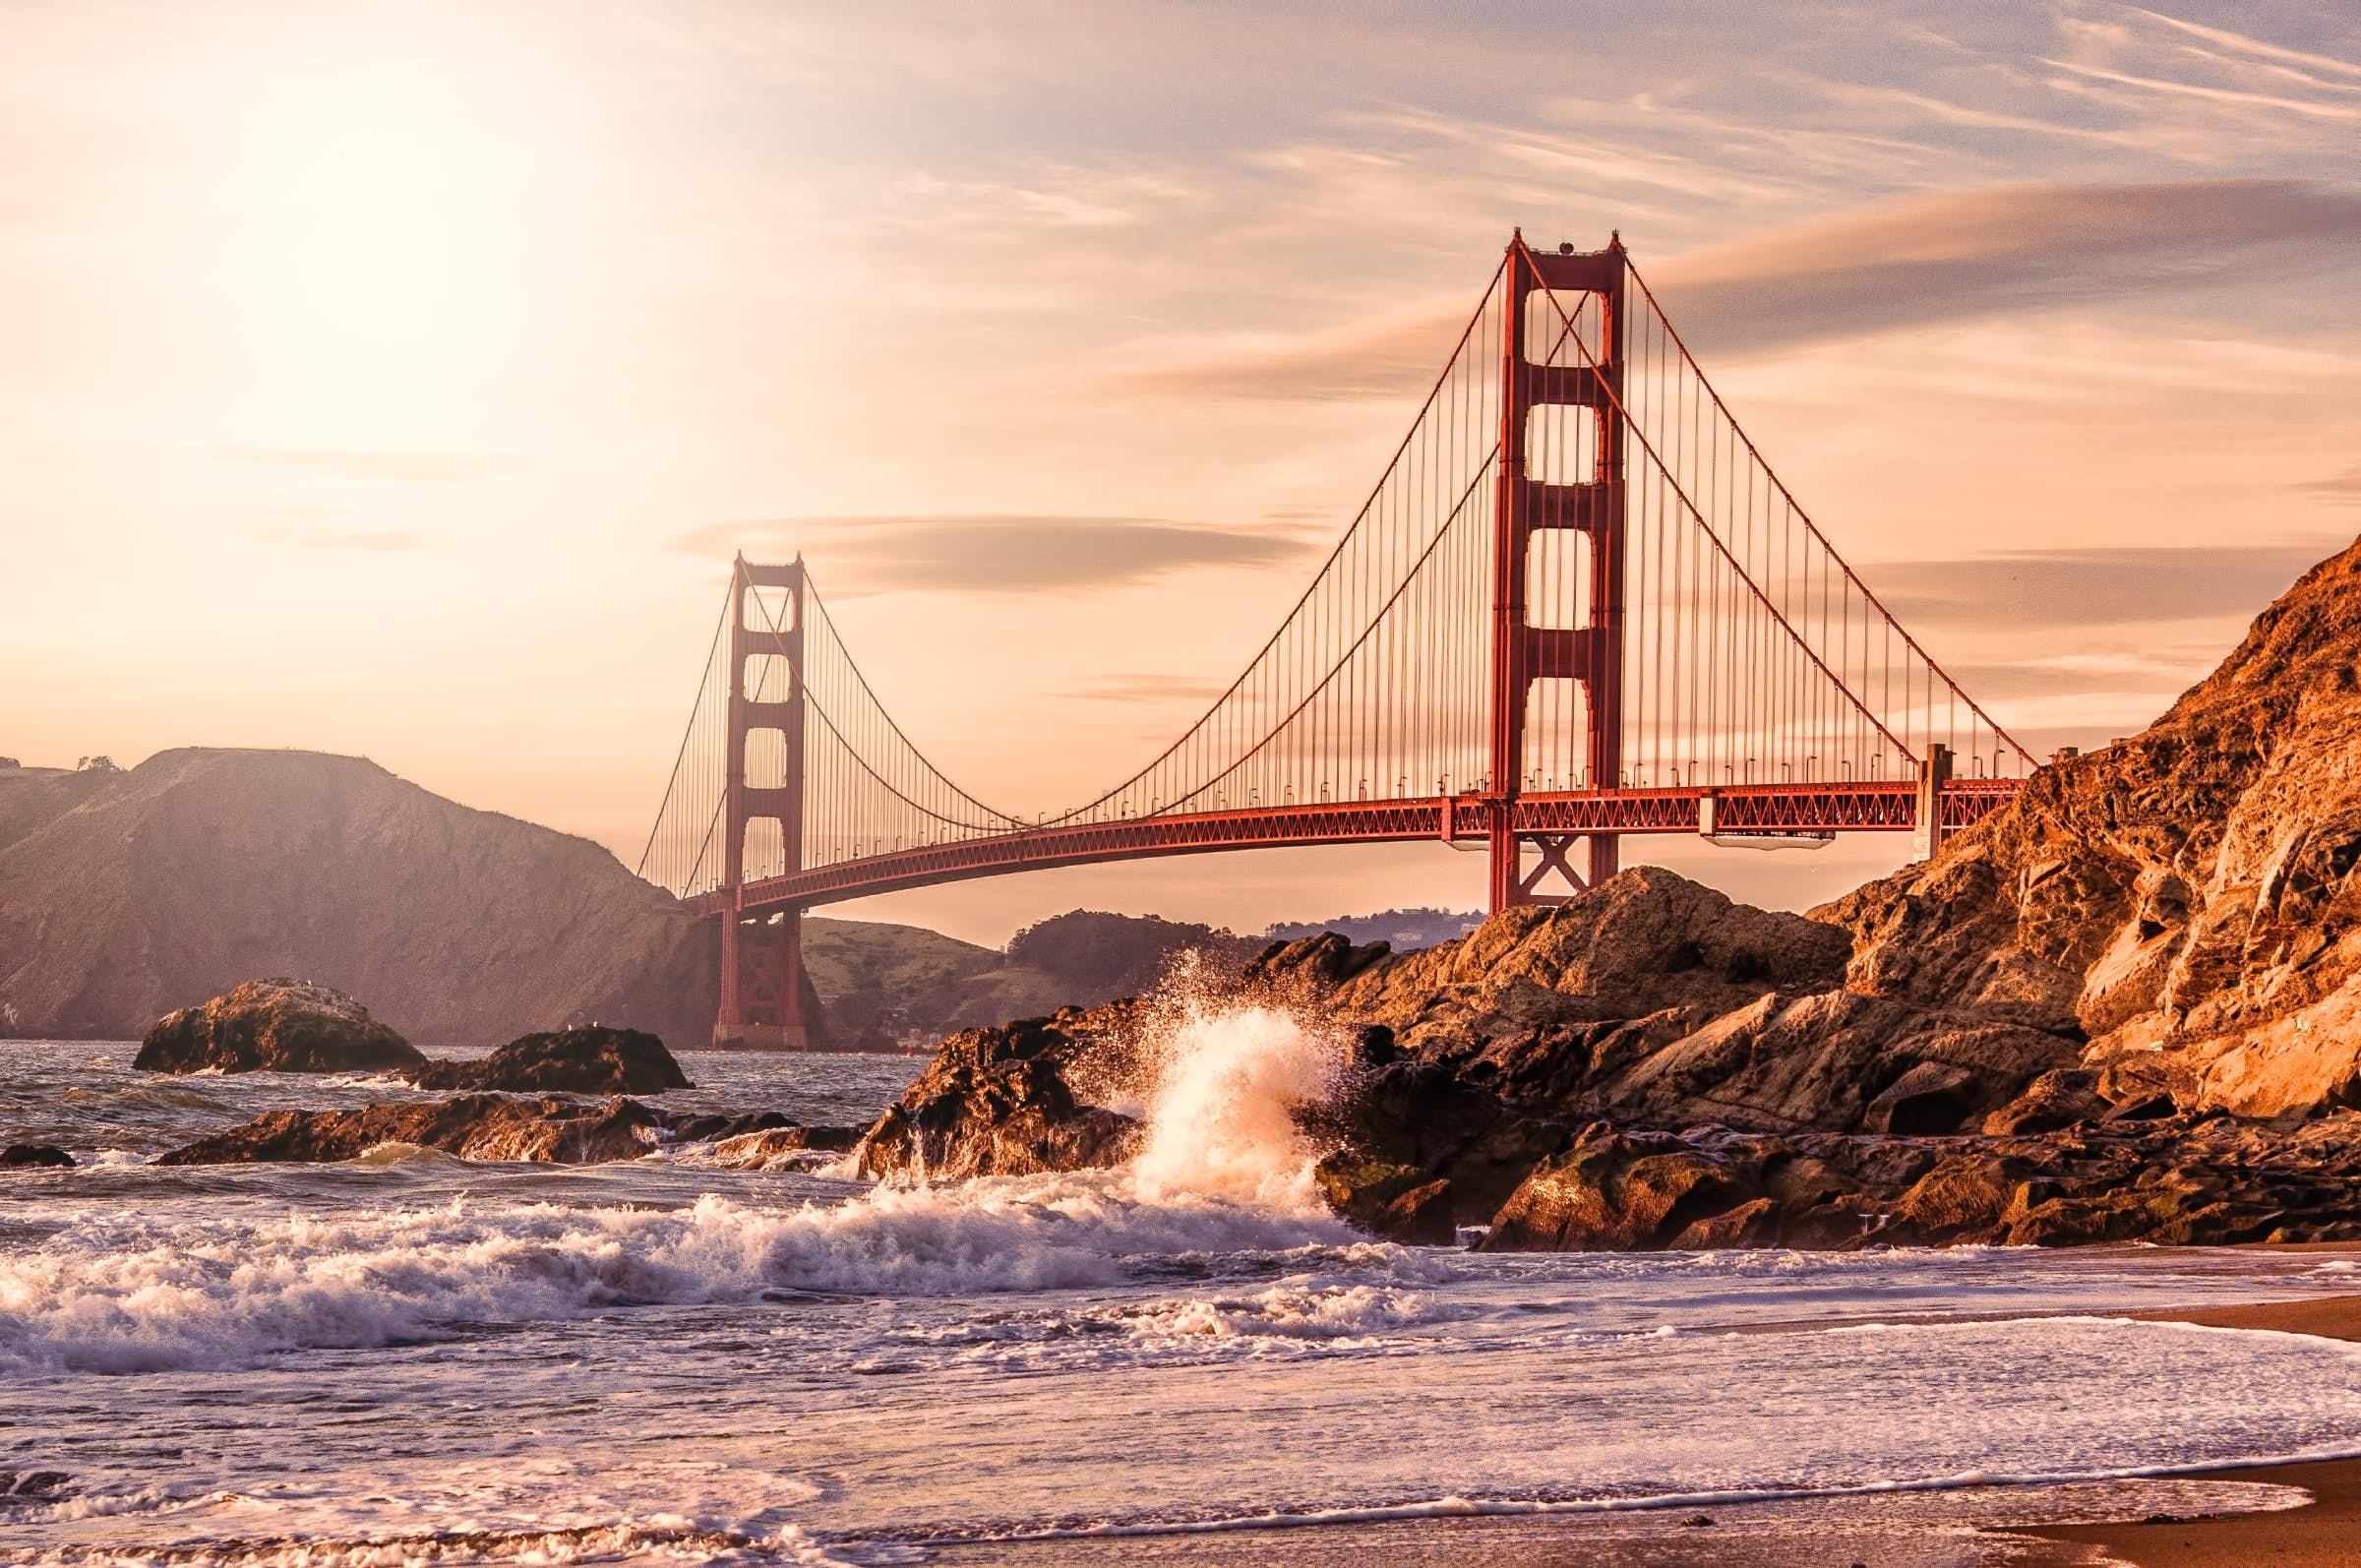 TOP 5 things to see in San Francisco